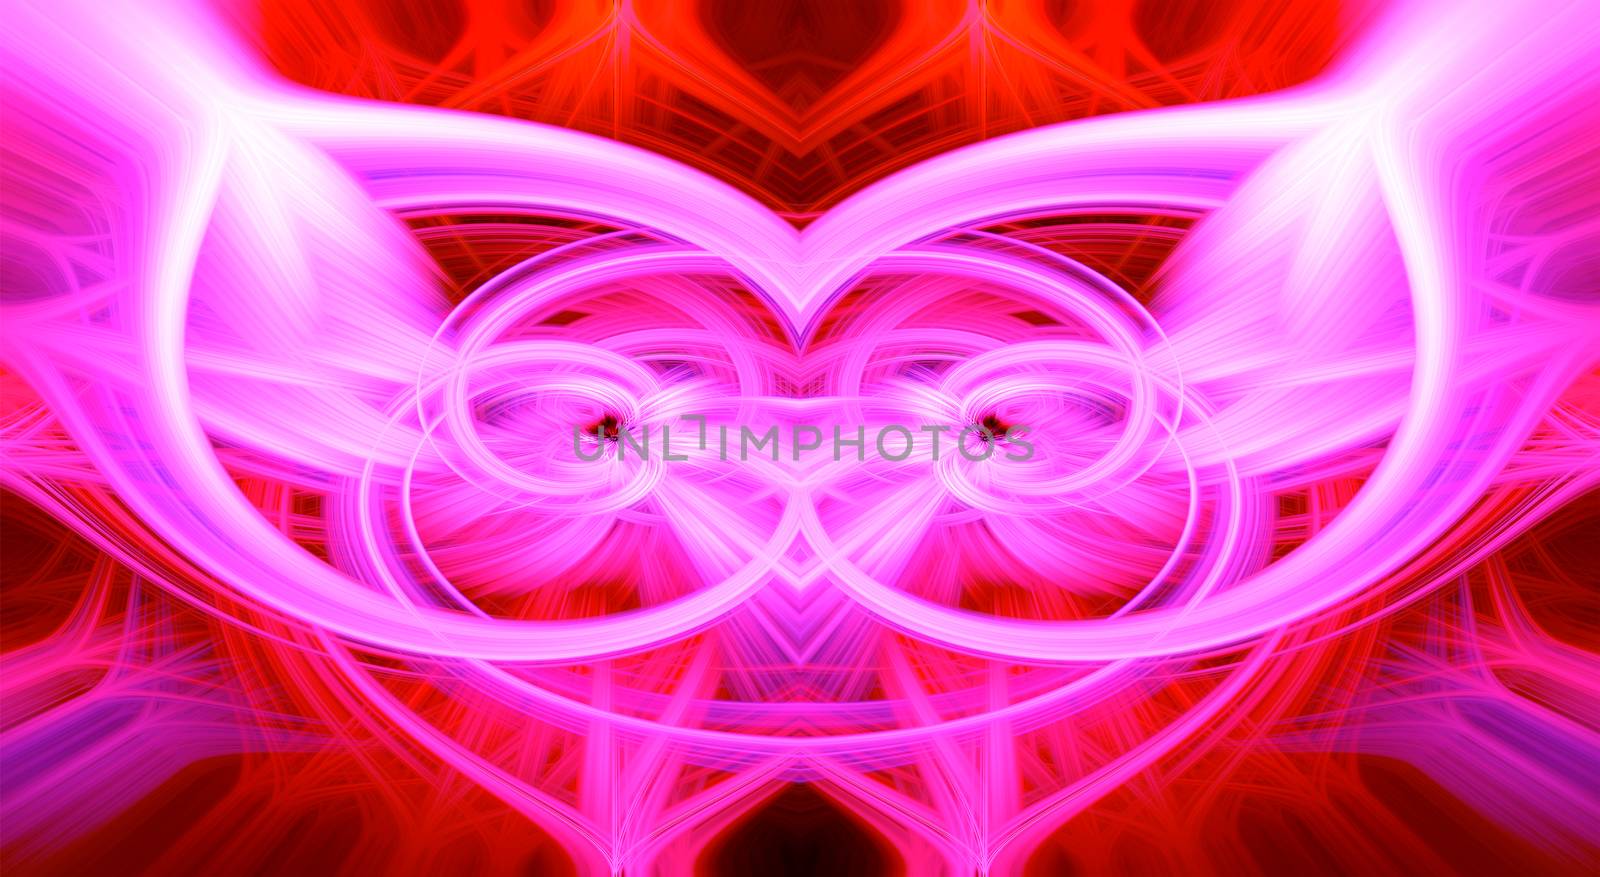 Beautiful abstract intertwined glowing 3d fibers forming a shape of sparkle, flame, flower, interlinked hearts. Purple, maroon, pink, and red colors. Amazing depth. Illustration.